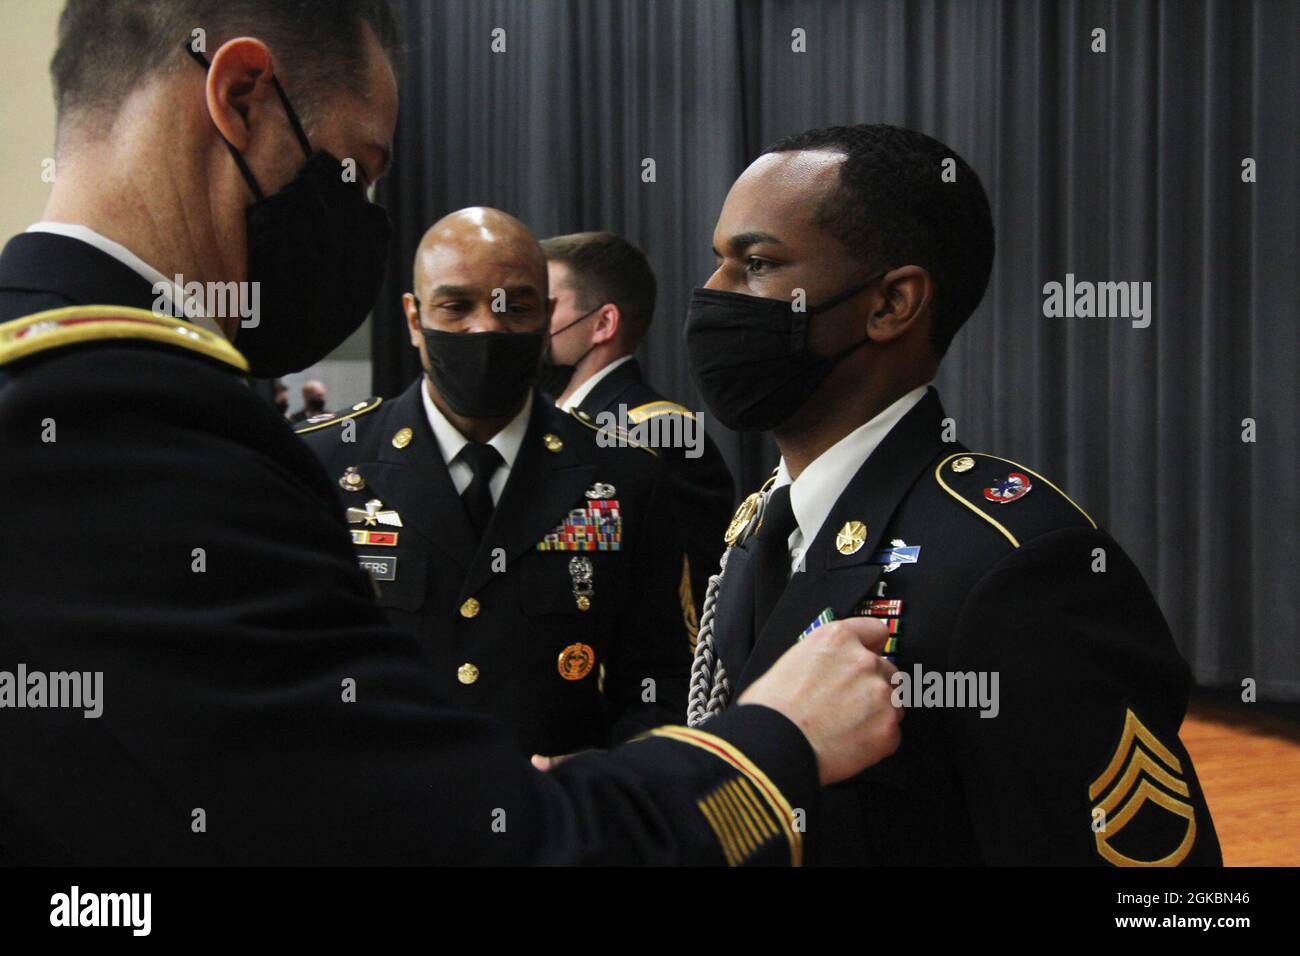 Lt. Col. Brian Kibitlewski, commander, Special Troops Battalion, 1st Theater Sustainment Command, and  Command Sgt. Major Sherman Waters Jr., senior enlisted advisor, STB, 1st TSC, pin the Army Achievement Medal to Staff Sgt. Nahjier Williams, public affairs noncommissioned officer, 1st TSC, at Fort Knox, Kentucky, March 5, 2021. Williams earned the award for designing the 1st TSC holiday card which won first place in the “People’s Choice” category during the Fort Knox holiday competition. Stock Photo